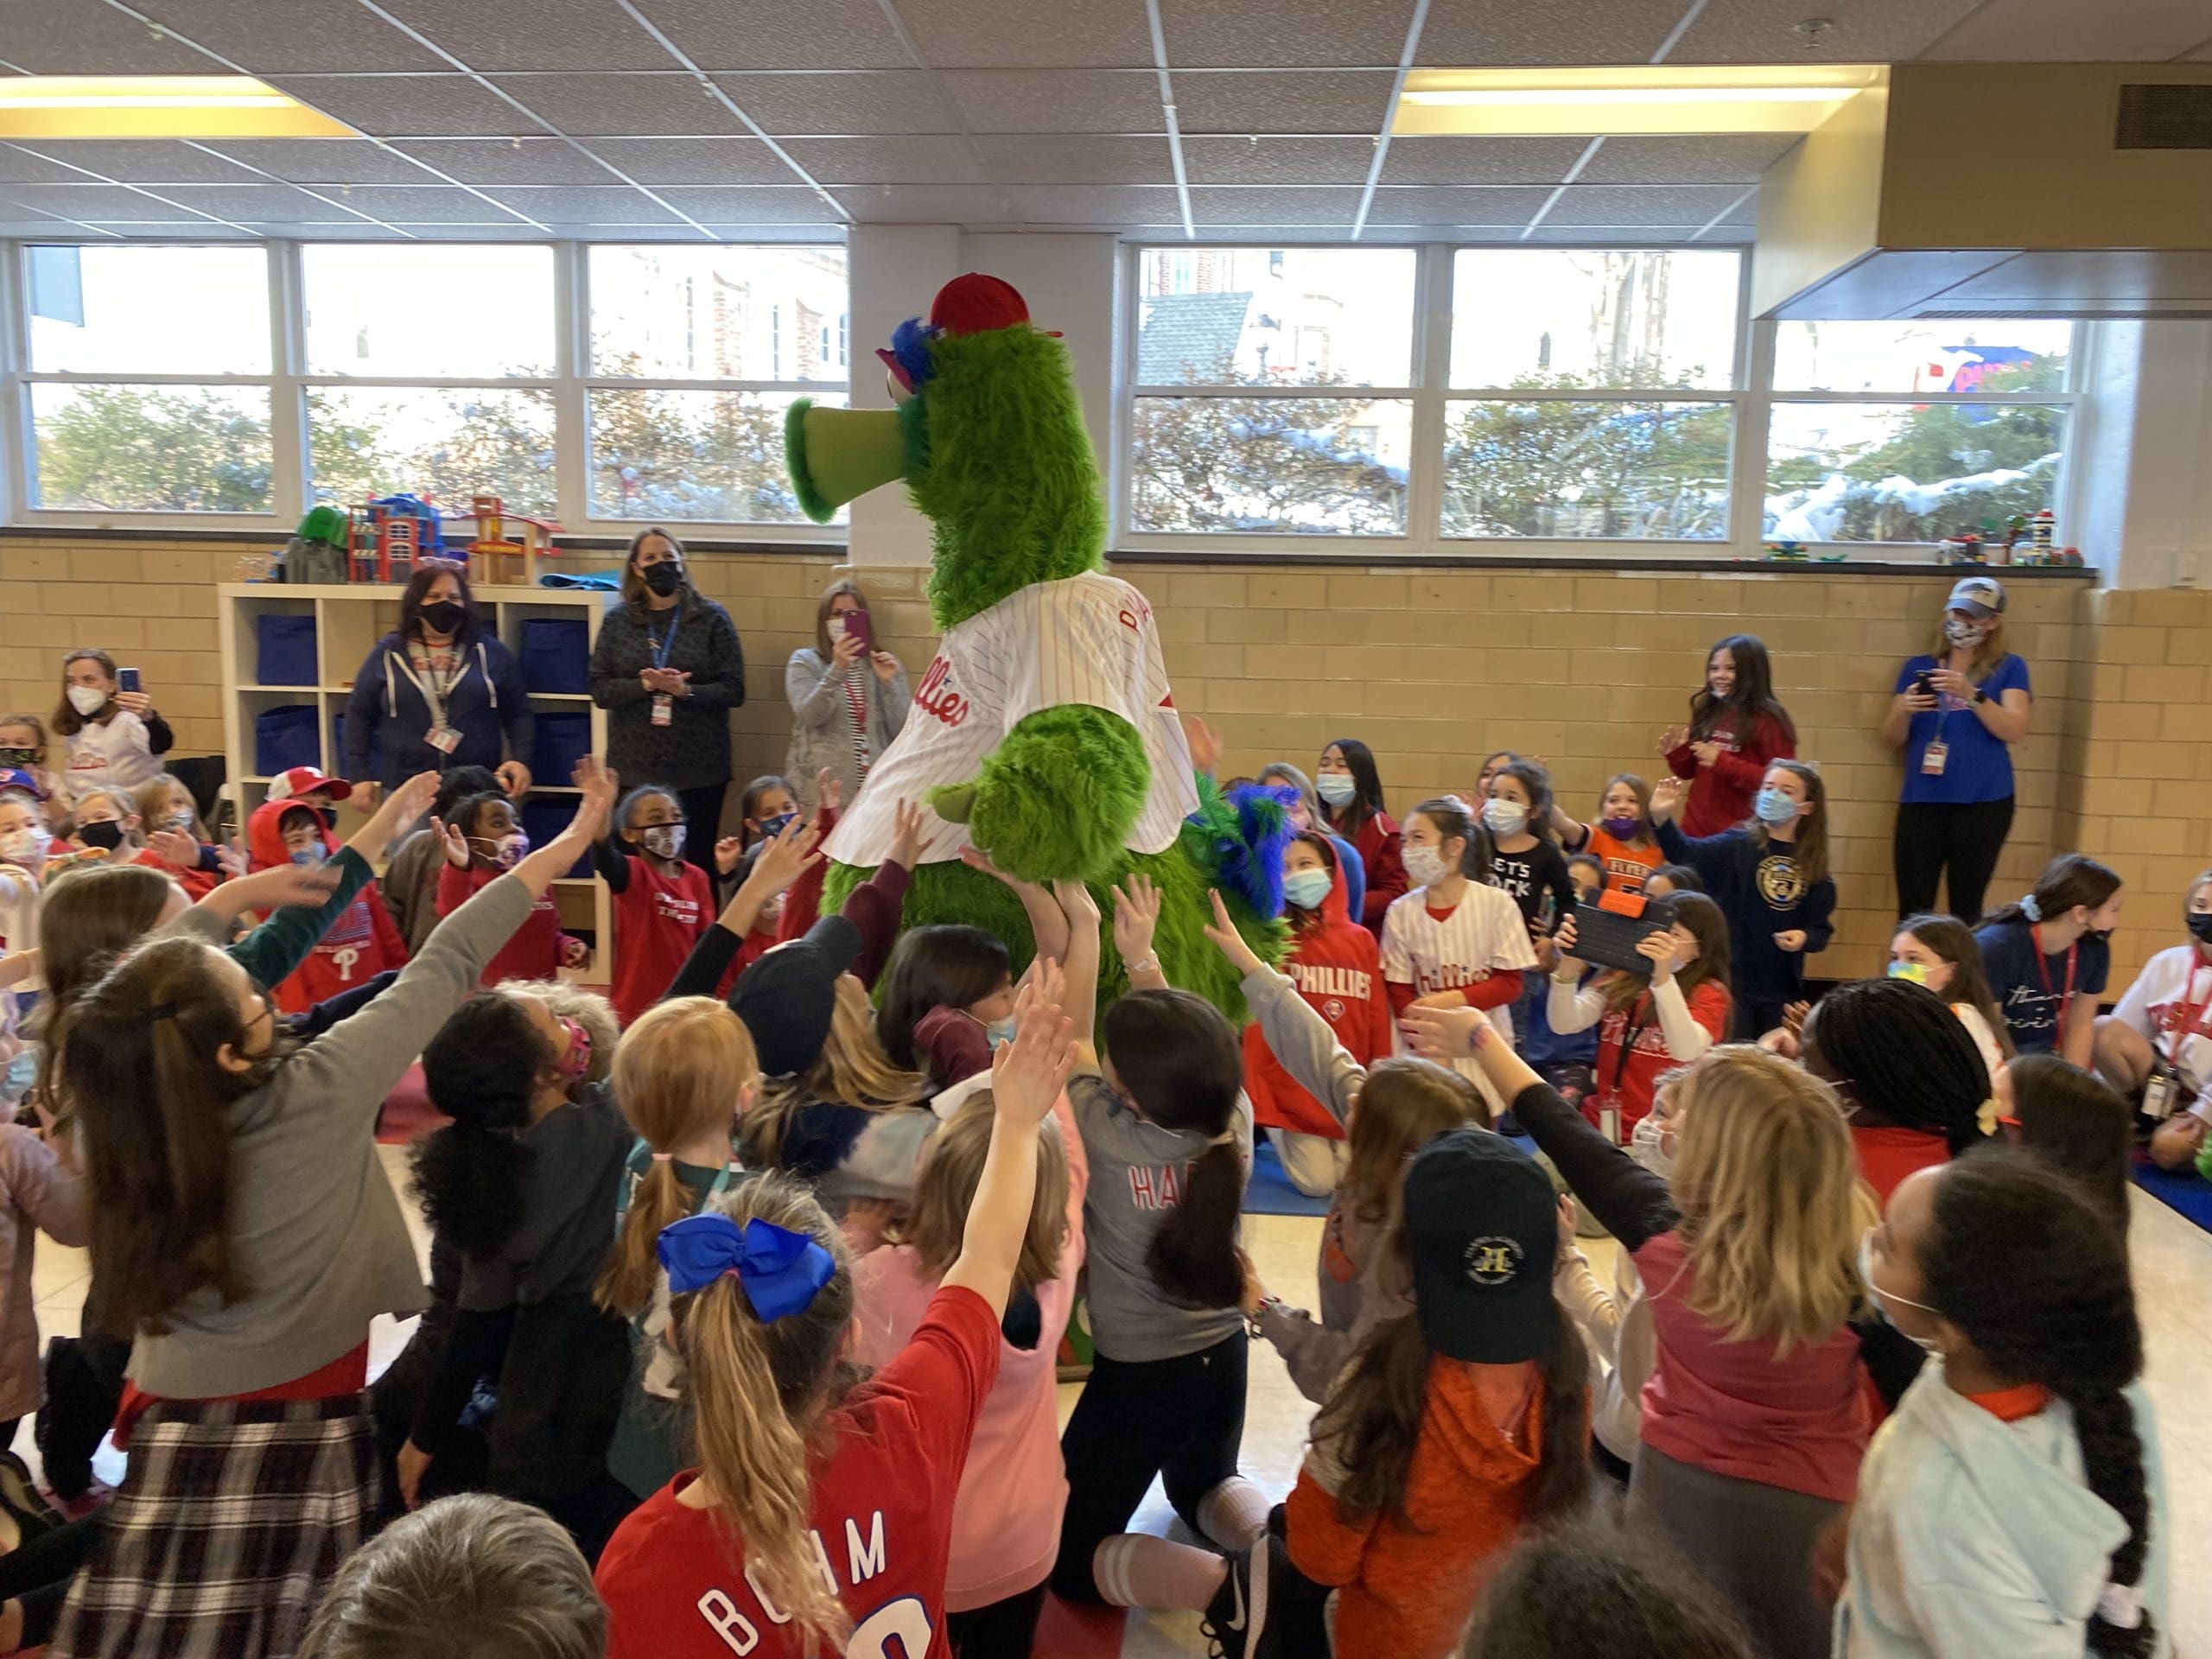 Featured image for “Phillie Phanatic celebrates reading with Ursuline students”